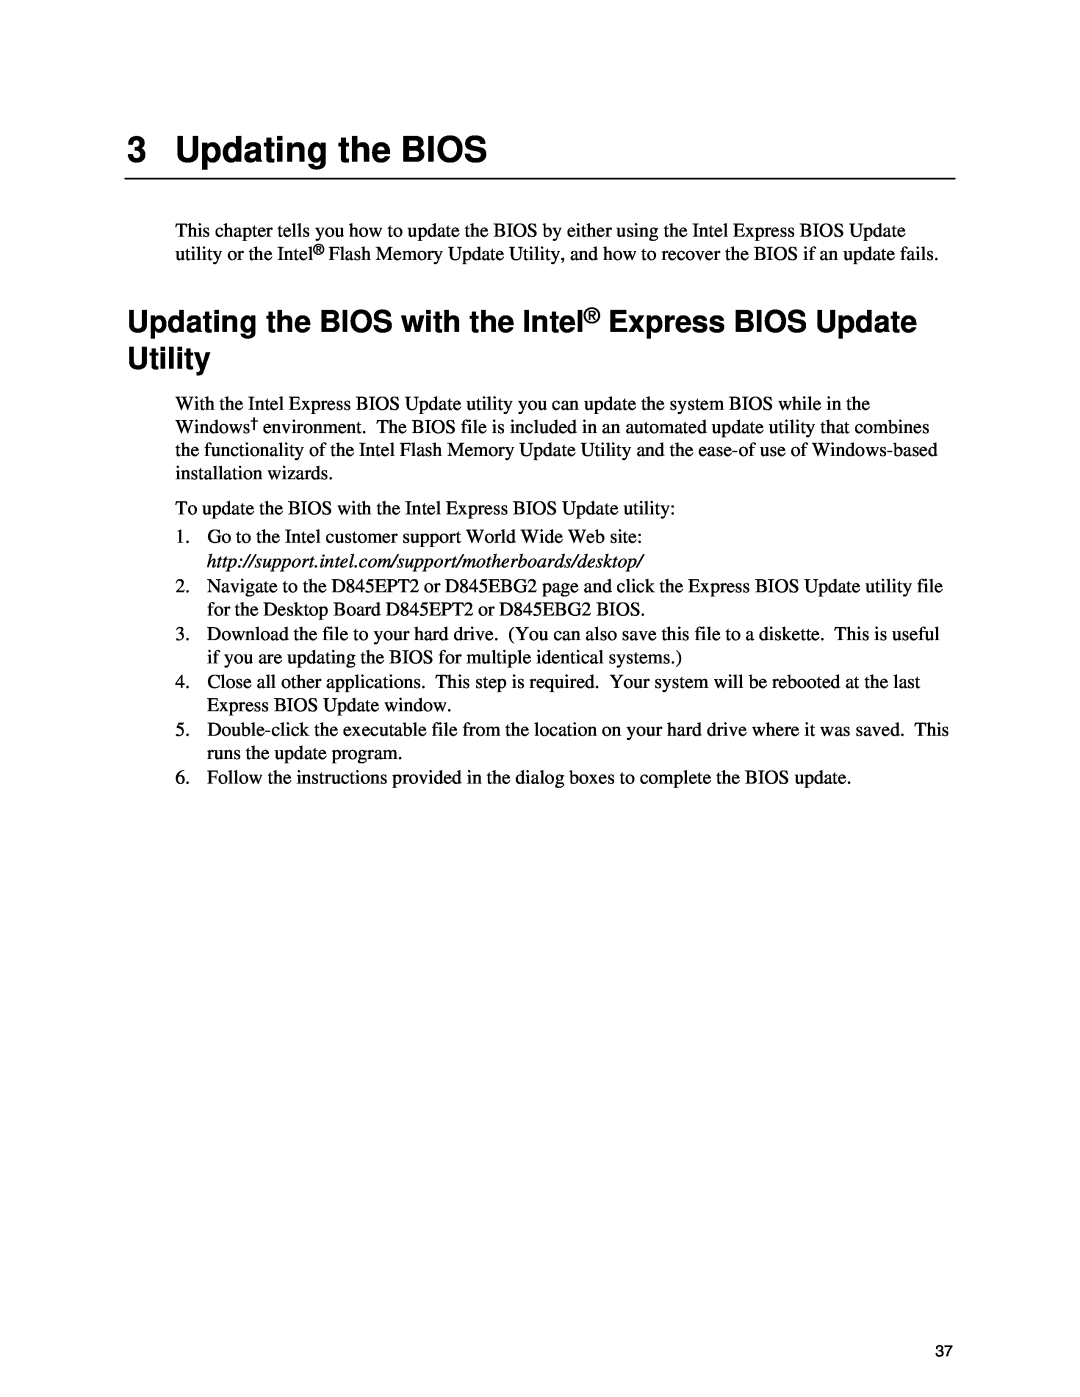 Intel D845EBG2, D845EPT2 manual Updating the BIOS with the Intel Express BIOS Update Utility 